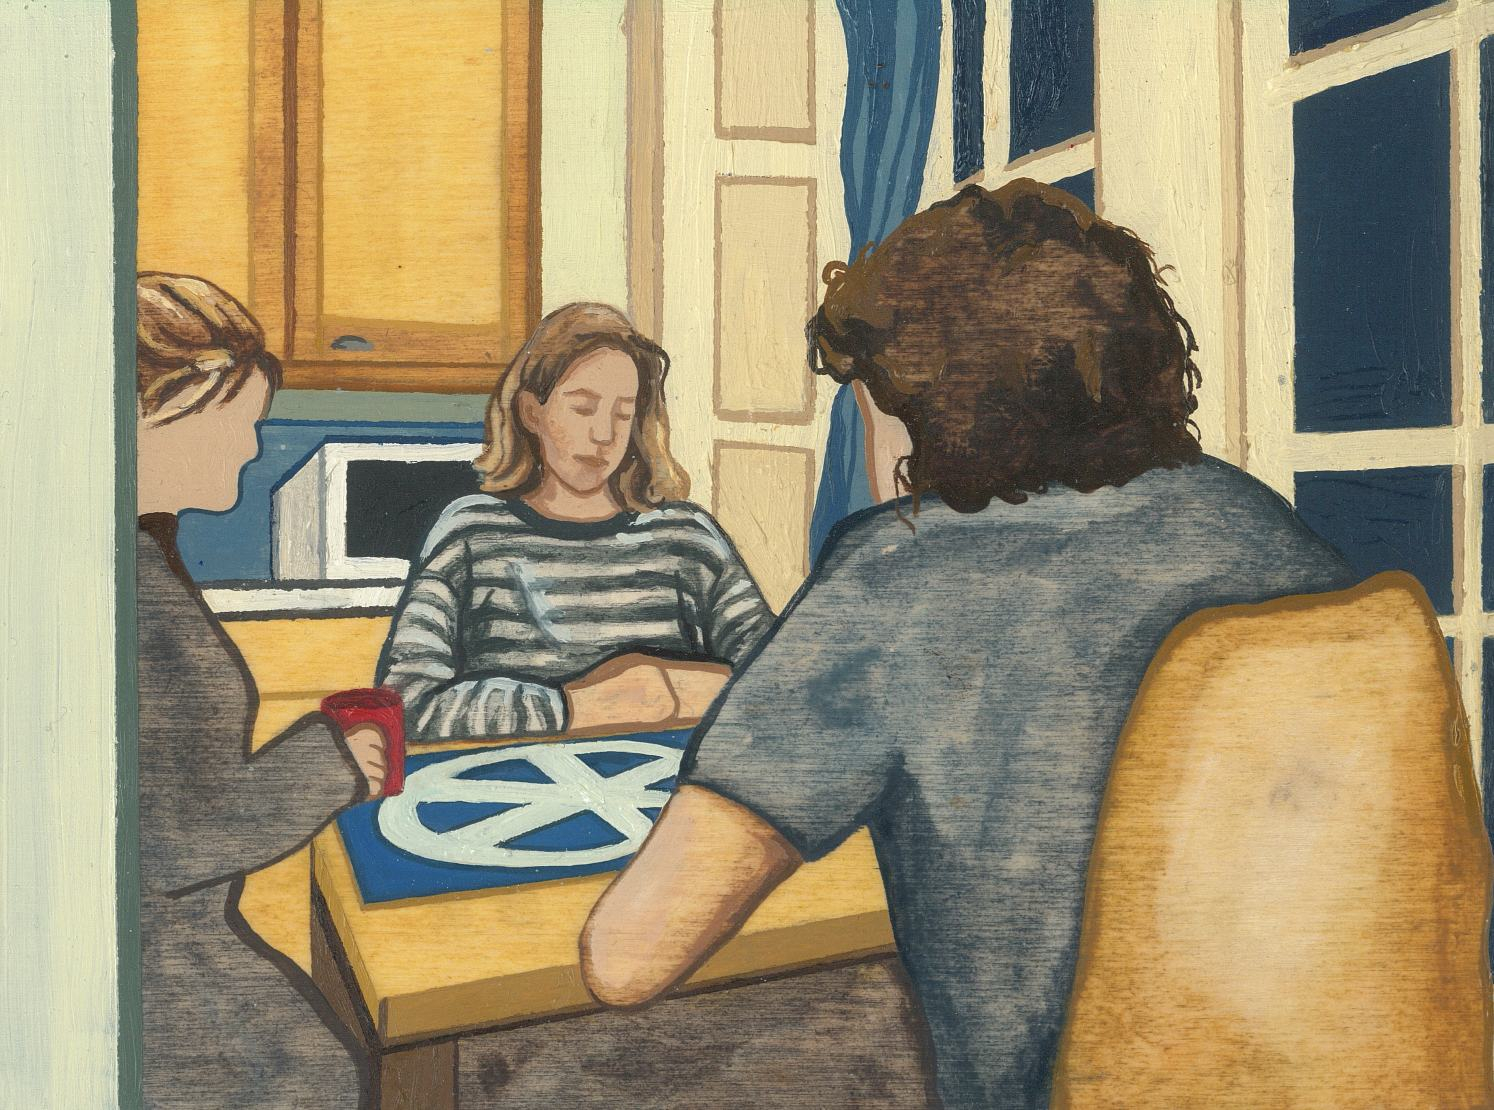 Painting of three figures playing Trivial Pursuit.